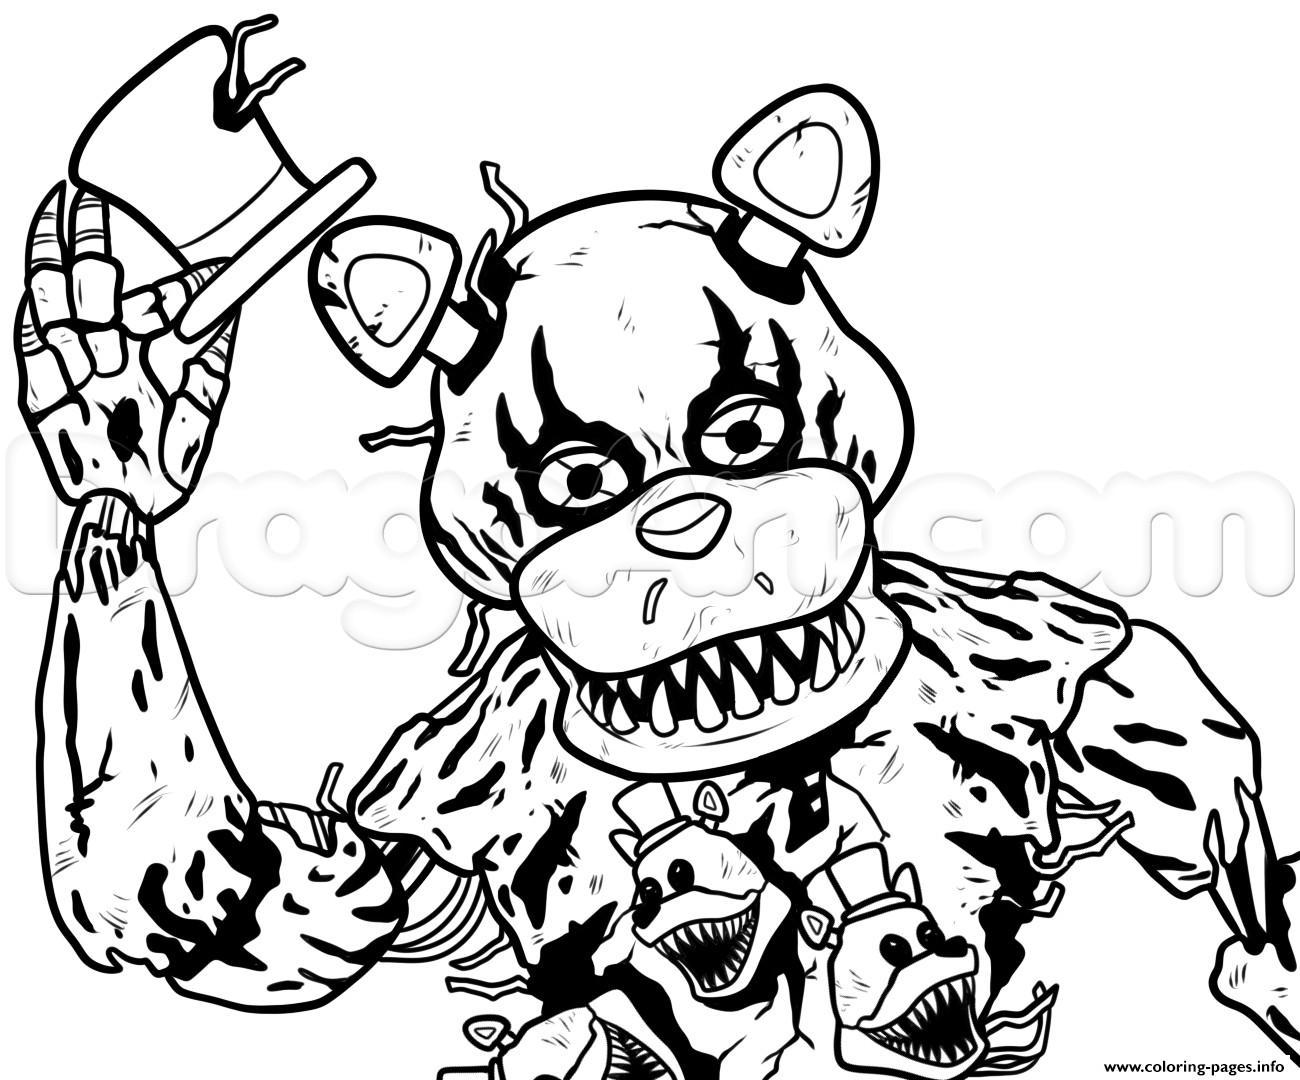 Fnaf Coloring Pages Nightmare
 Draw Nightmare Freddy Fazbear Fnaf Coloring Pages Printable